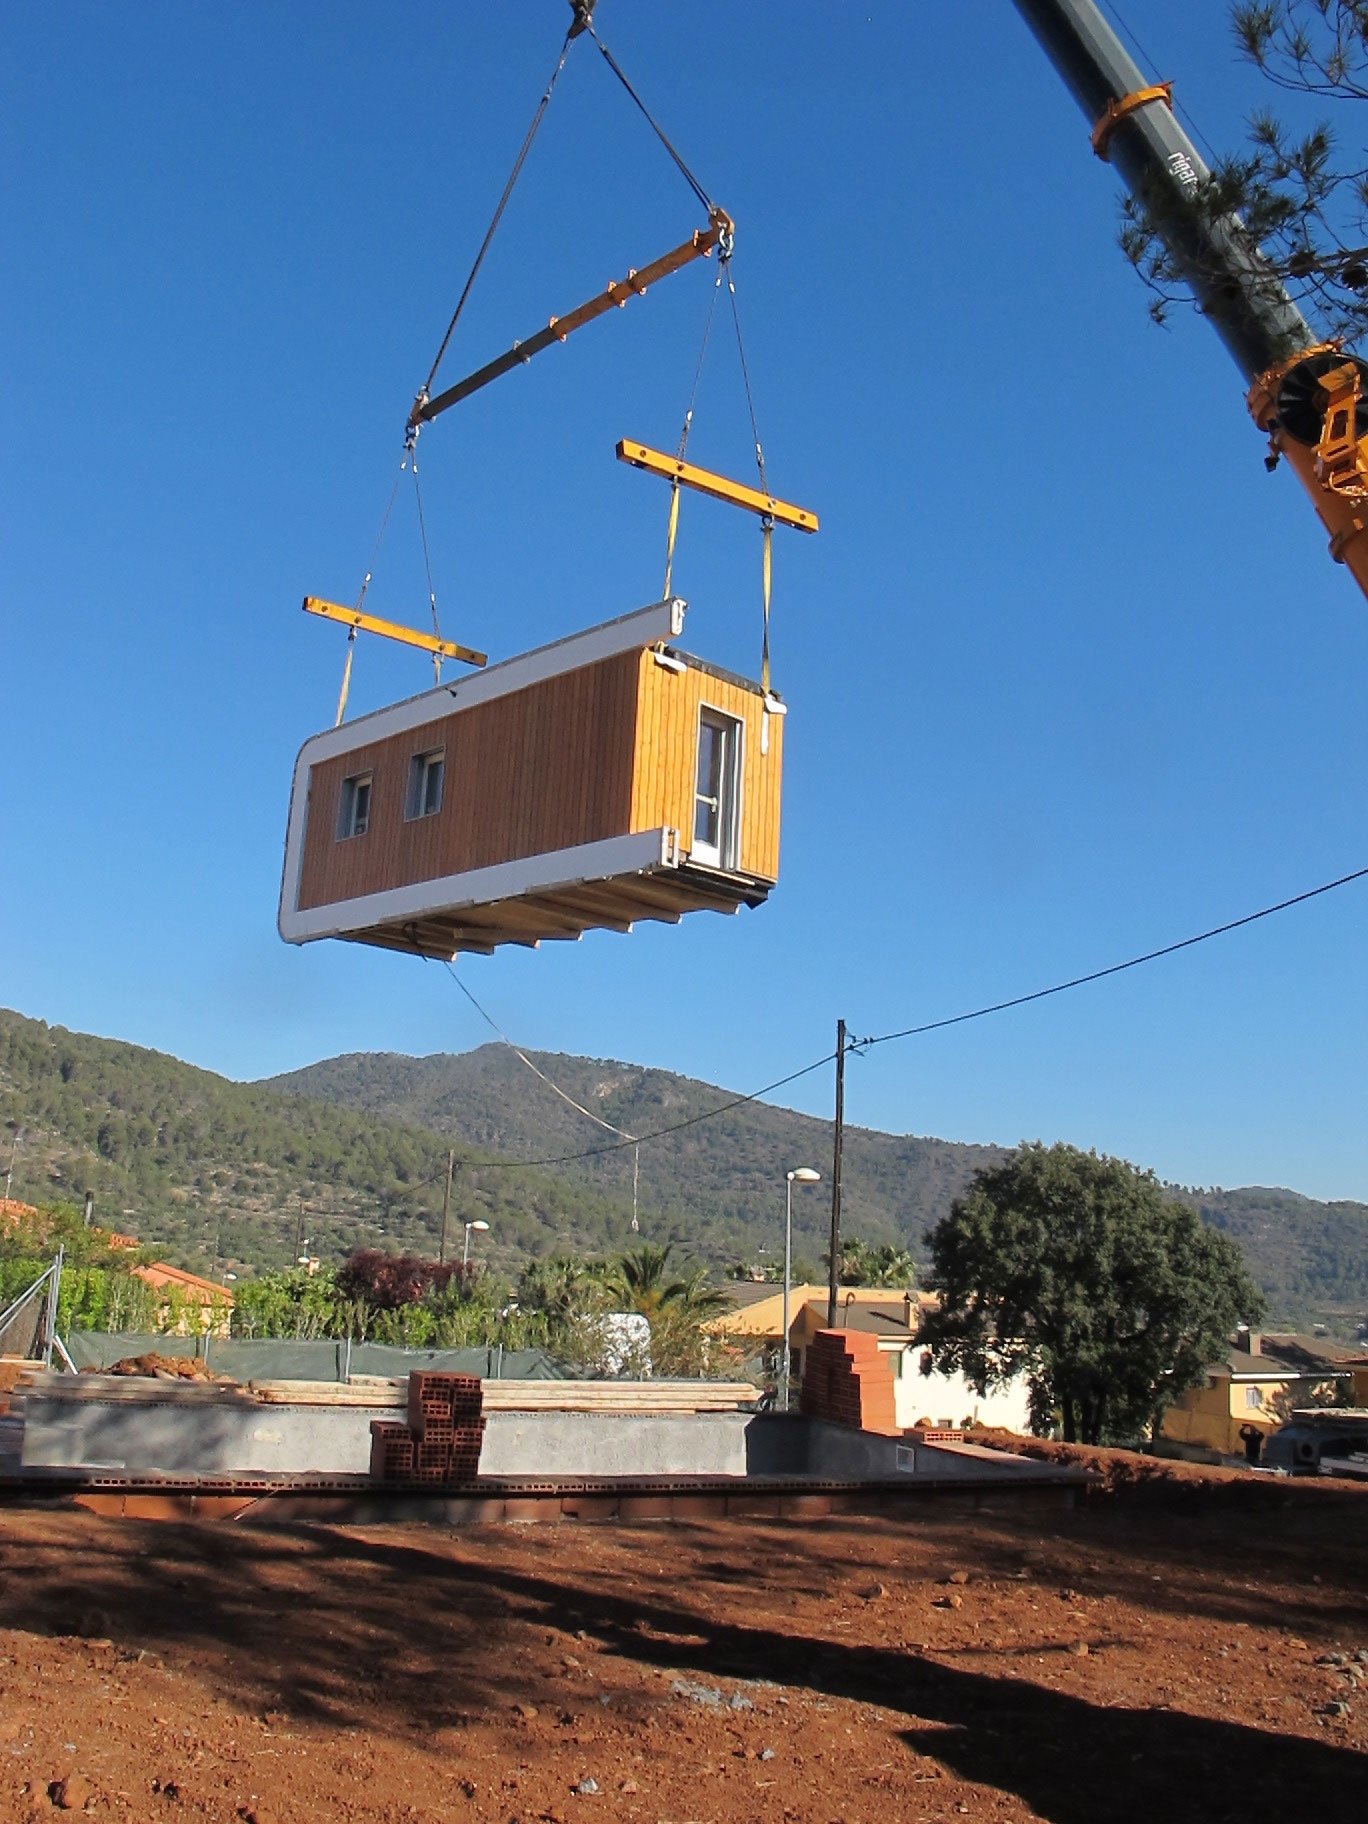 Eco-Friendly and Energy Efficiency with Mobile Device Control of El Refugio Inteligente by NOEM-01